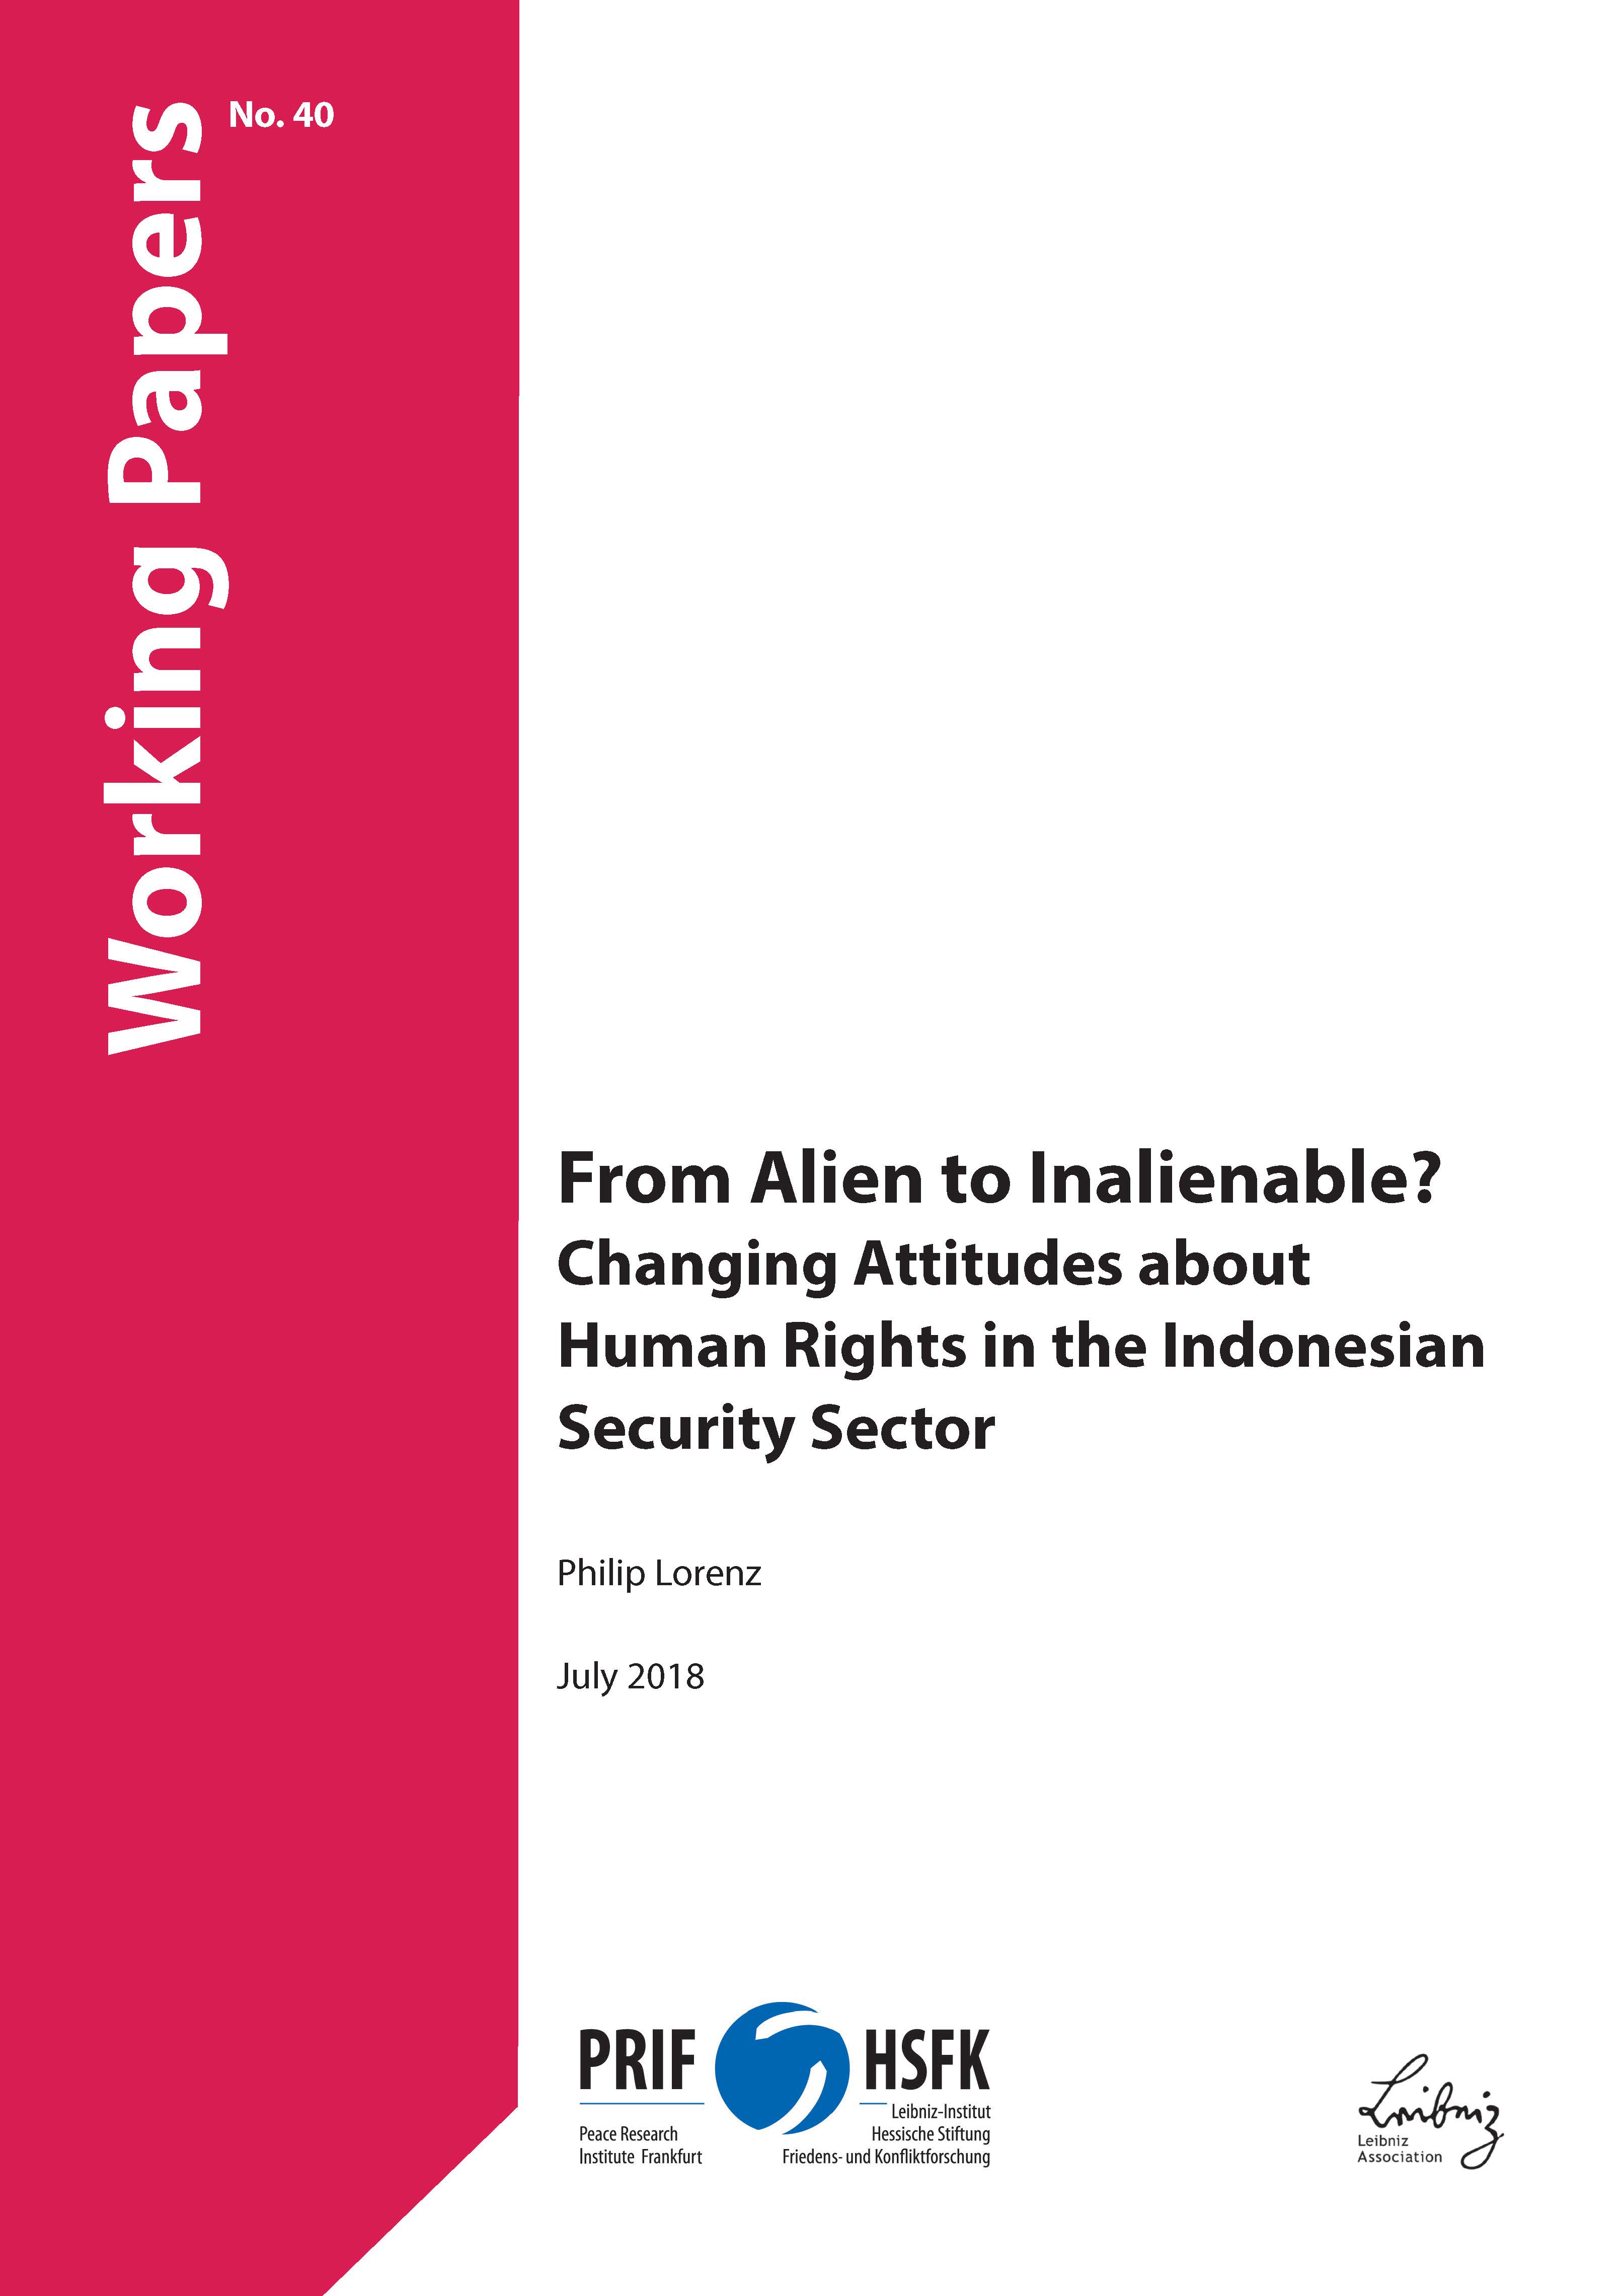 Download: From Alien to Inalienable?